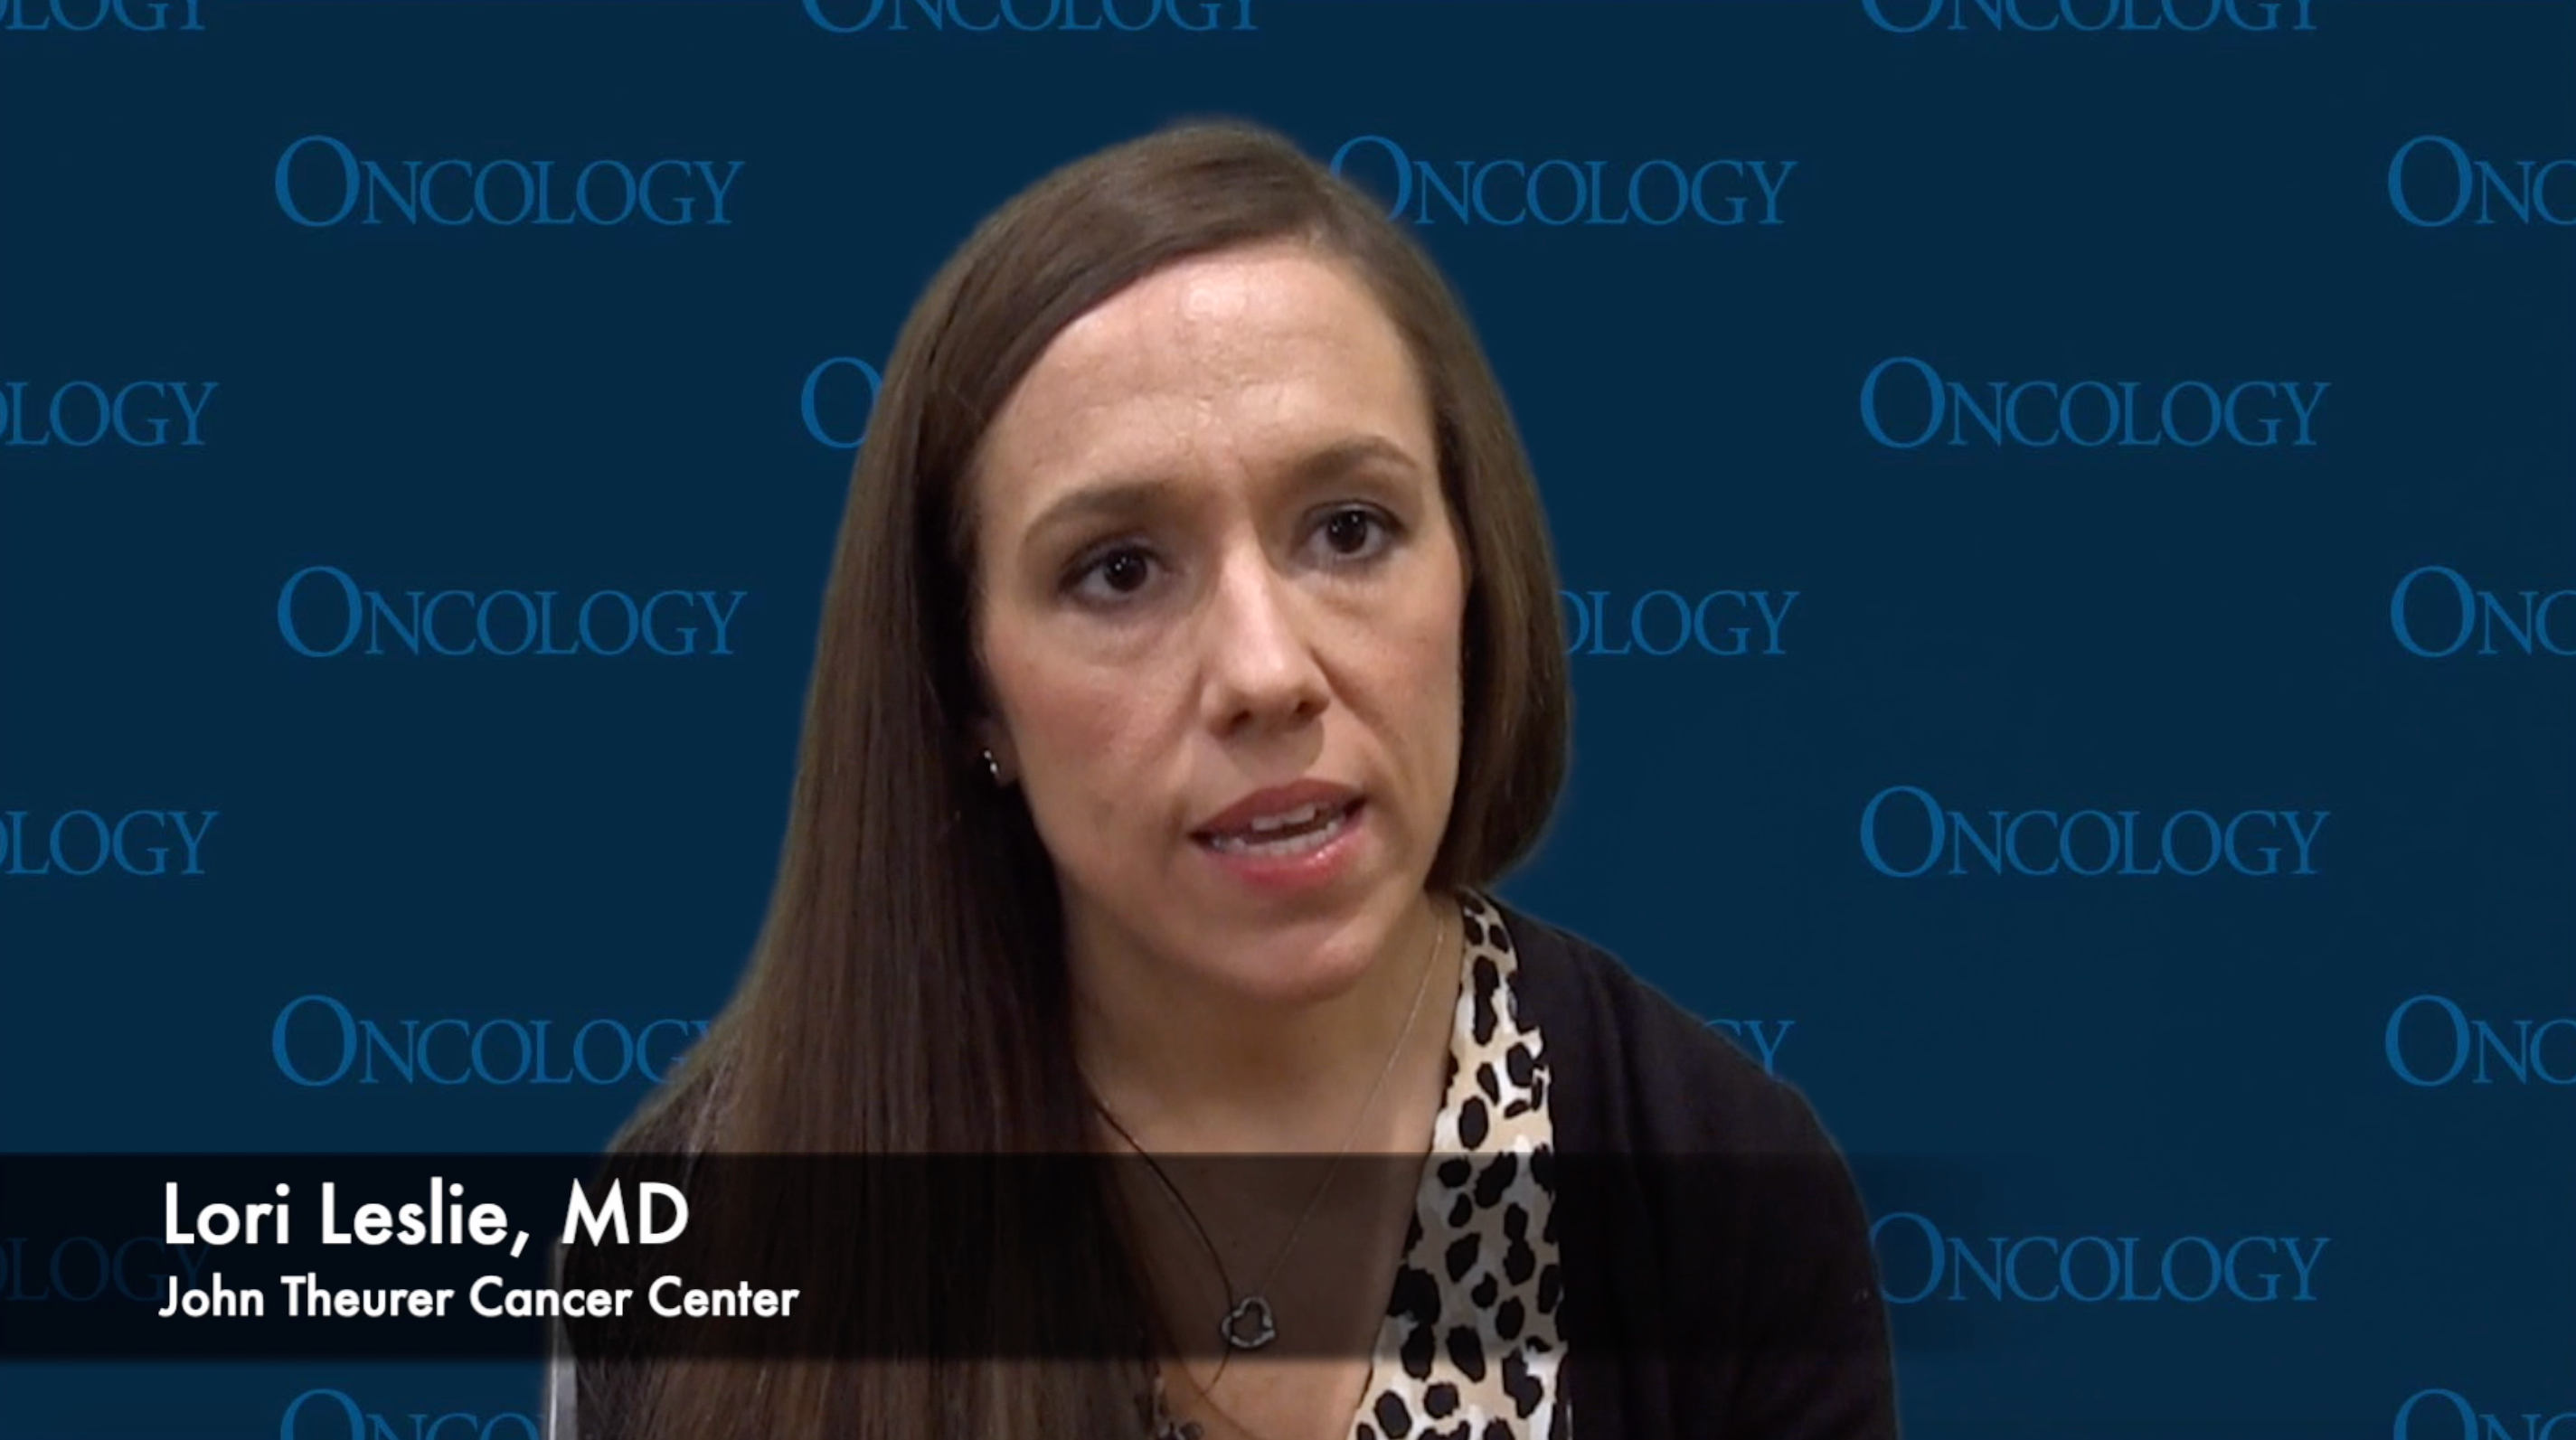 Lori Leslie, MD, Discusses CAR T-cell therapy and DLBCL